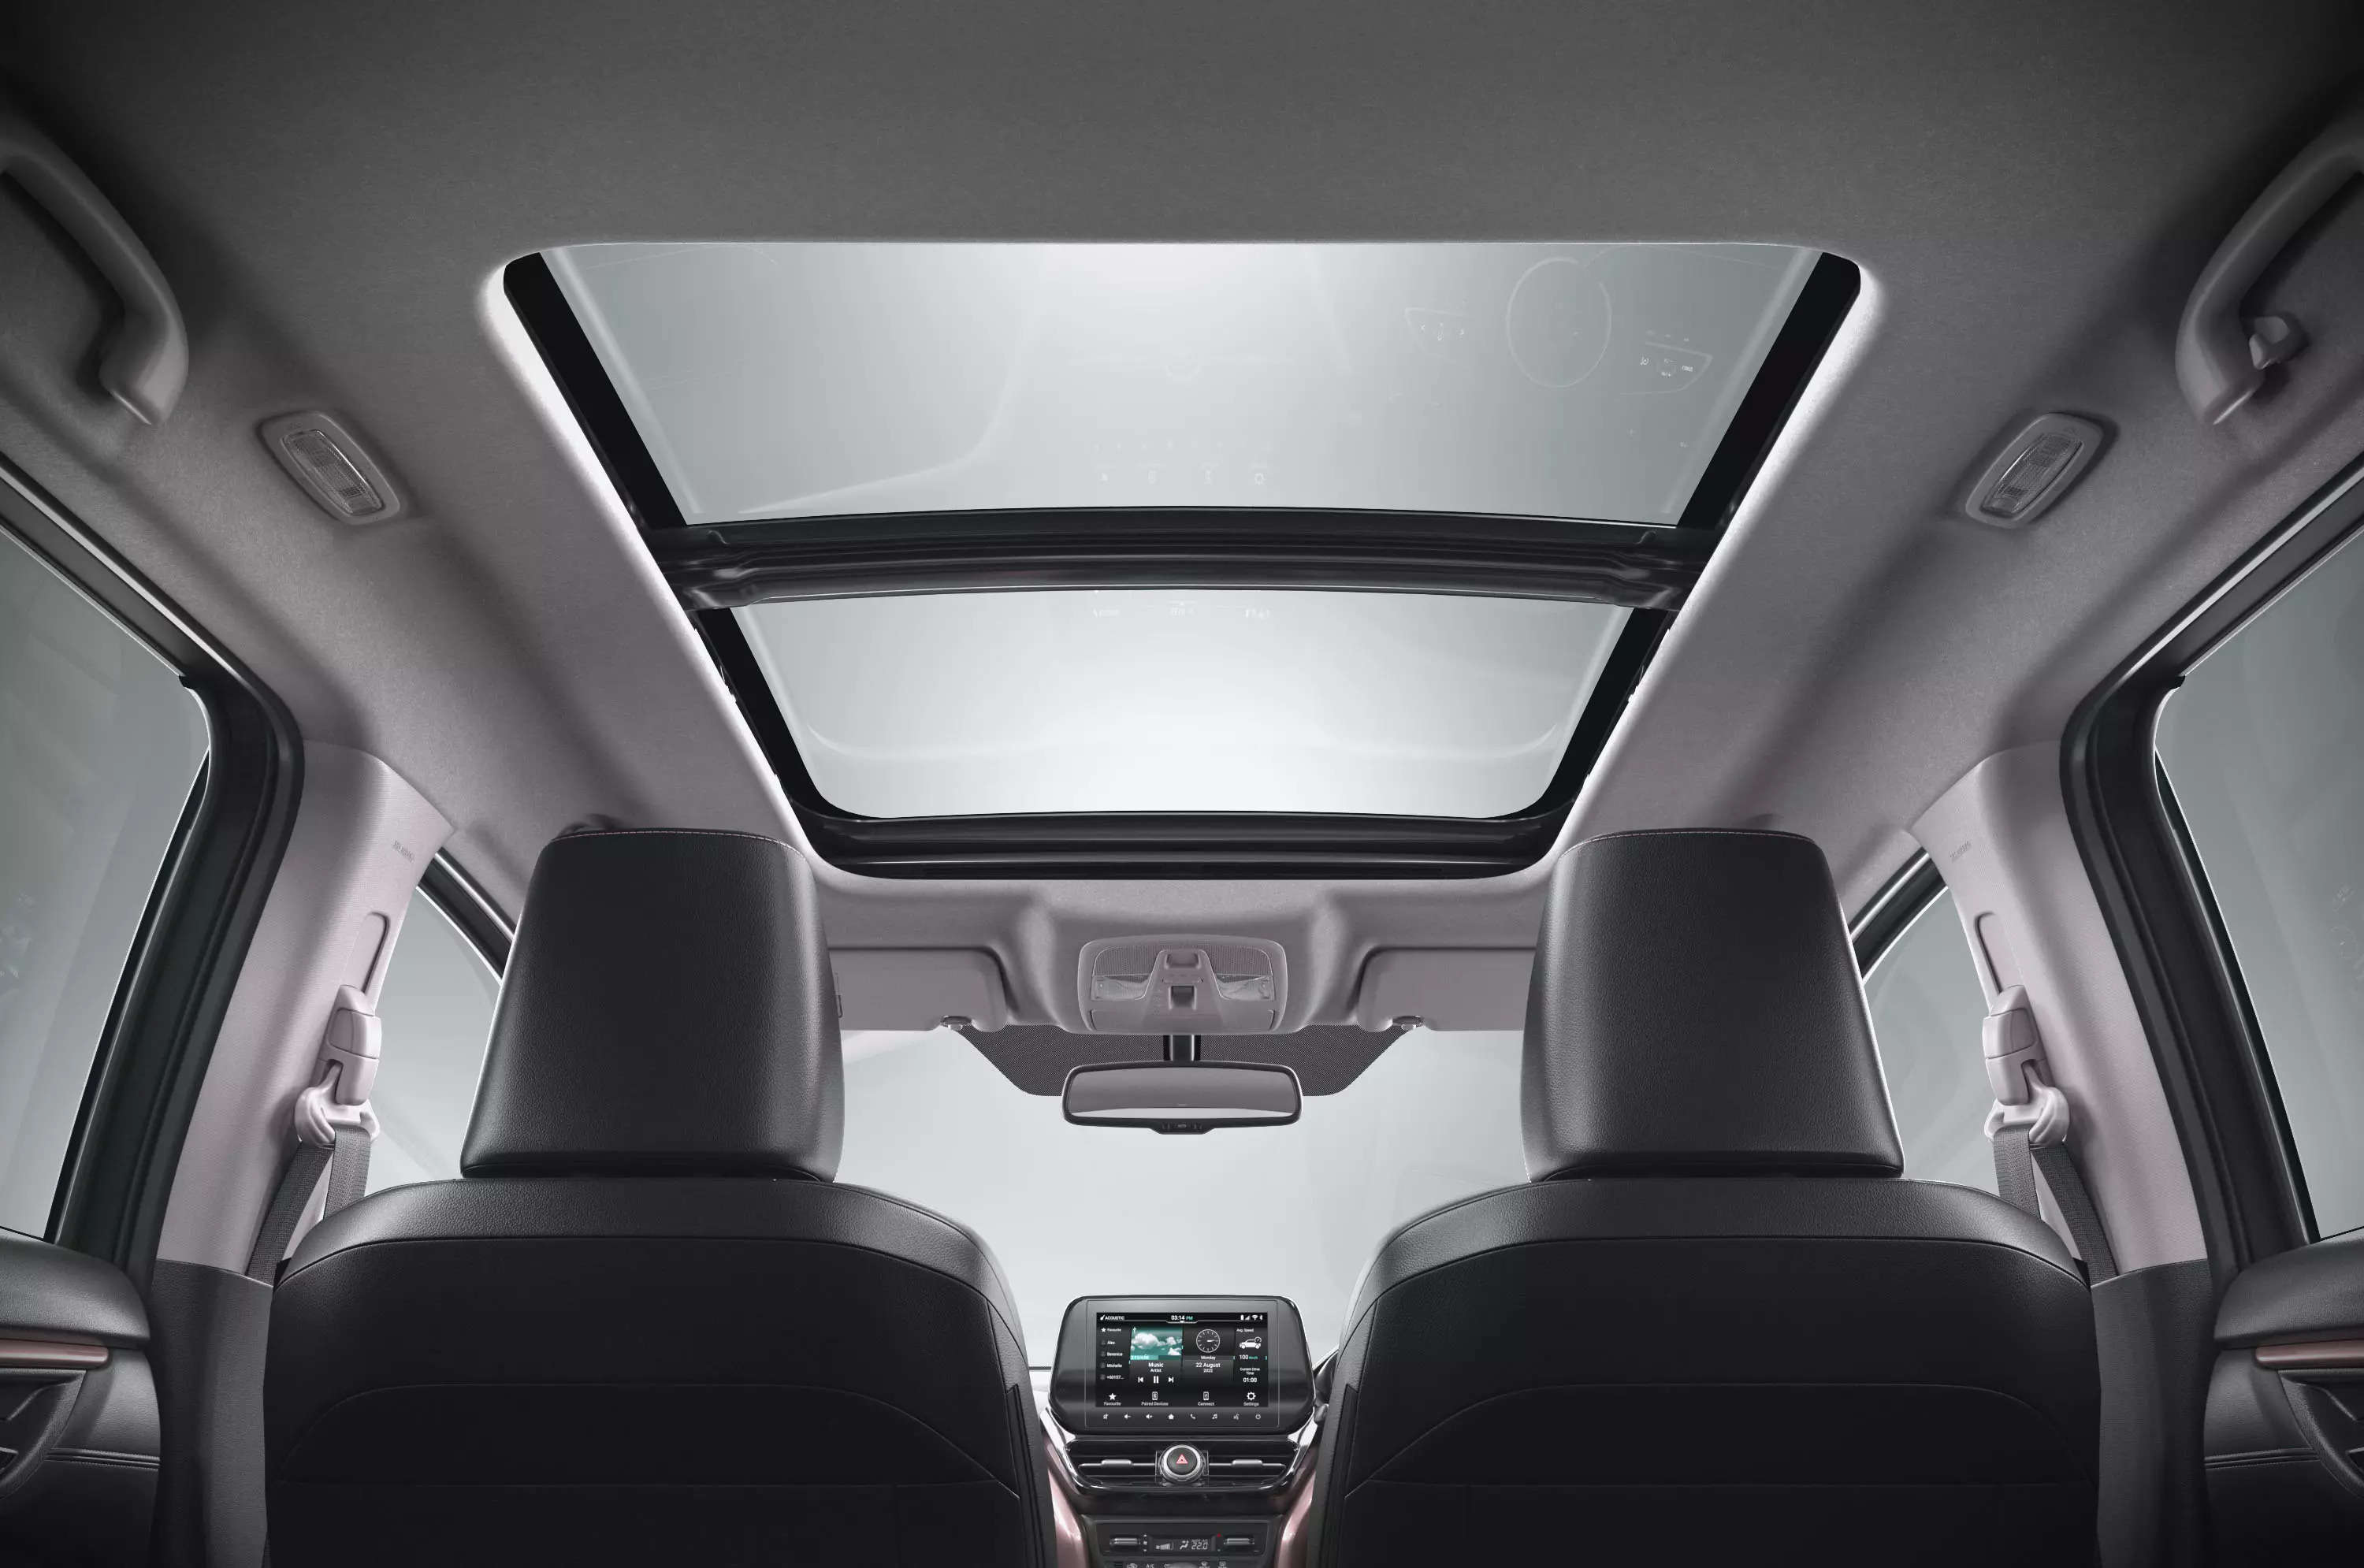     The Grand Vitara is built on the Suzuki TECT platform (Global C platform) and includes a panoramic sunroof, a fully digital instrument panel, ventilated seats for the driver and co-driver, among others. 